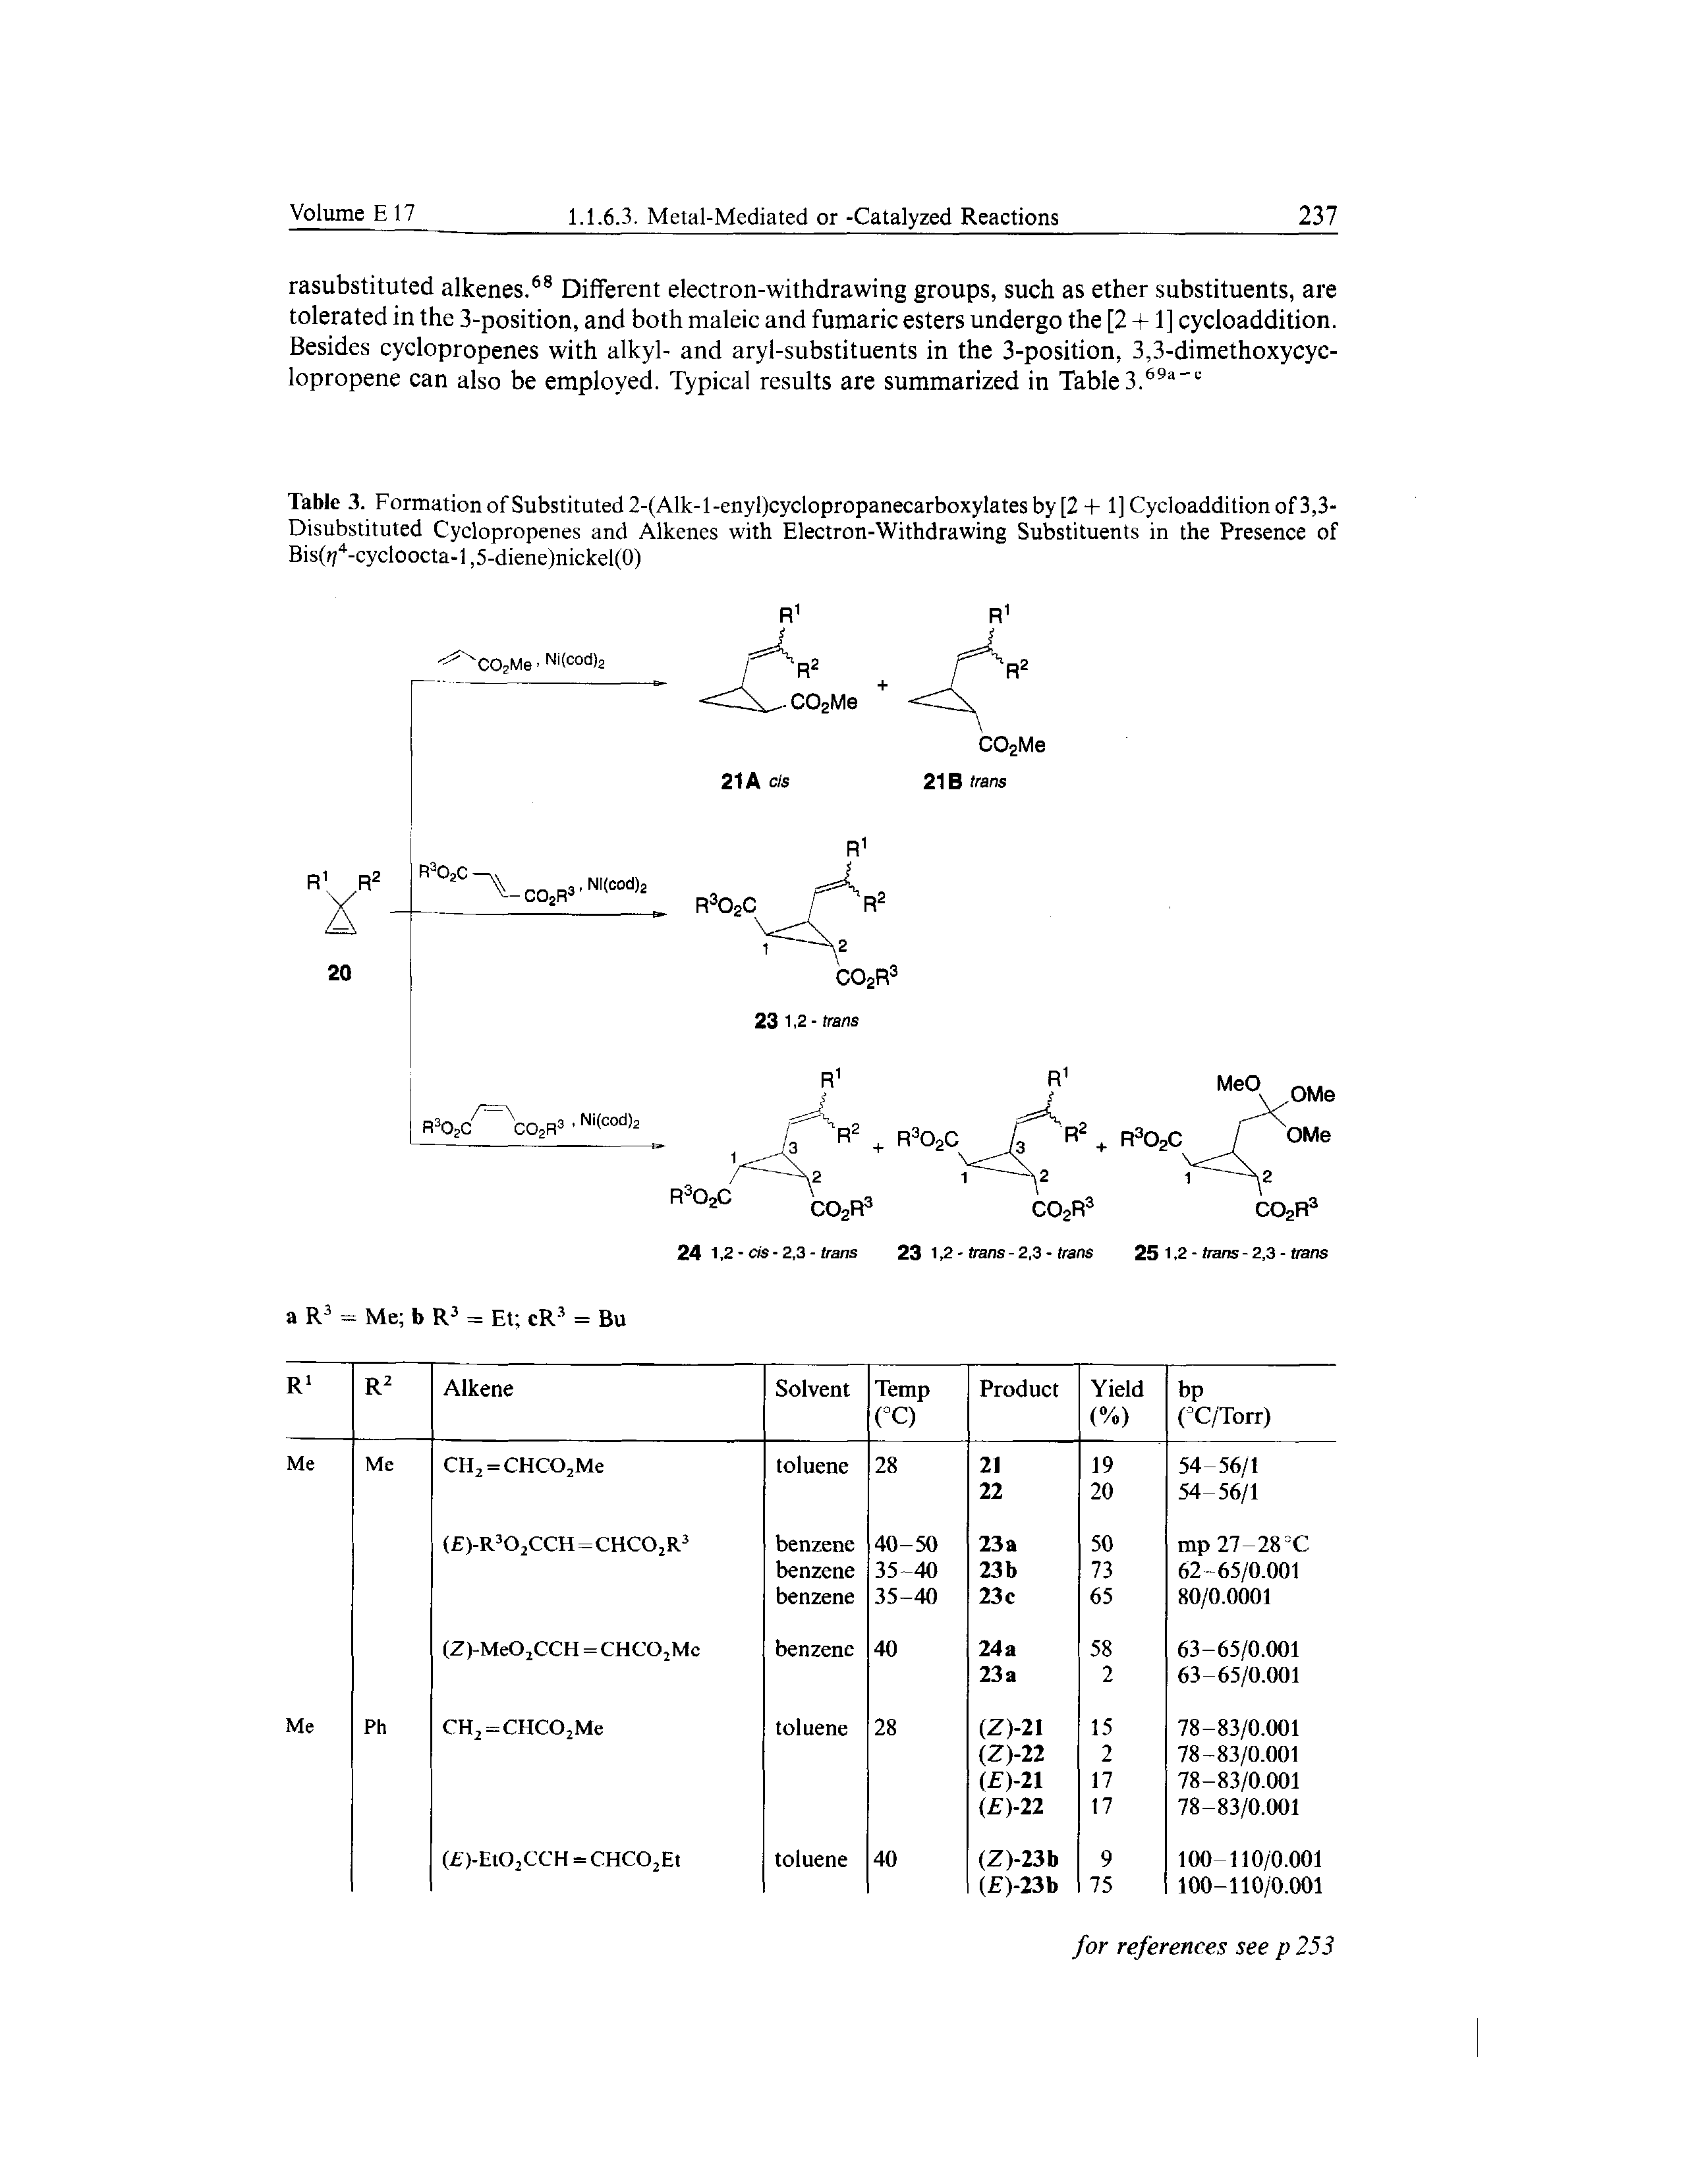 Table 3. Formation of Substituted 2-(Alk-l-enyl)cyclopropanecarboxylates by [2 + 1] Cycloaddition of 3,3-Disubstituted Cyclopropenes and Alkenes with Electron-Withdrawing Substituents in the Presence of Bis( -cycloocta-l,5-diene)nickel(0)...